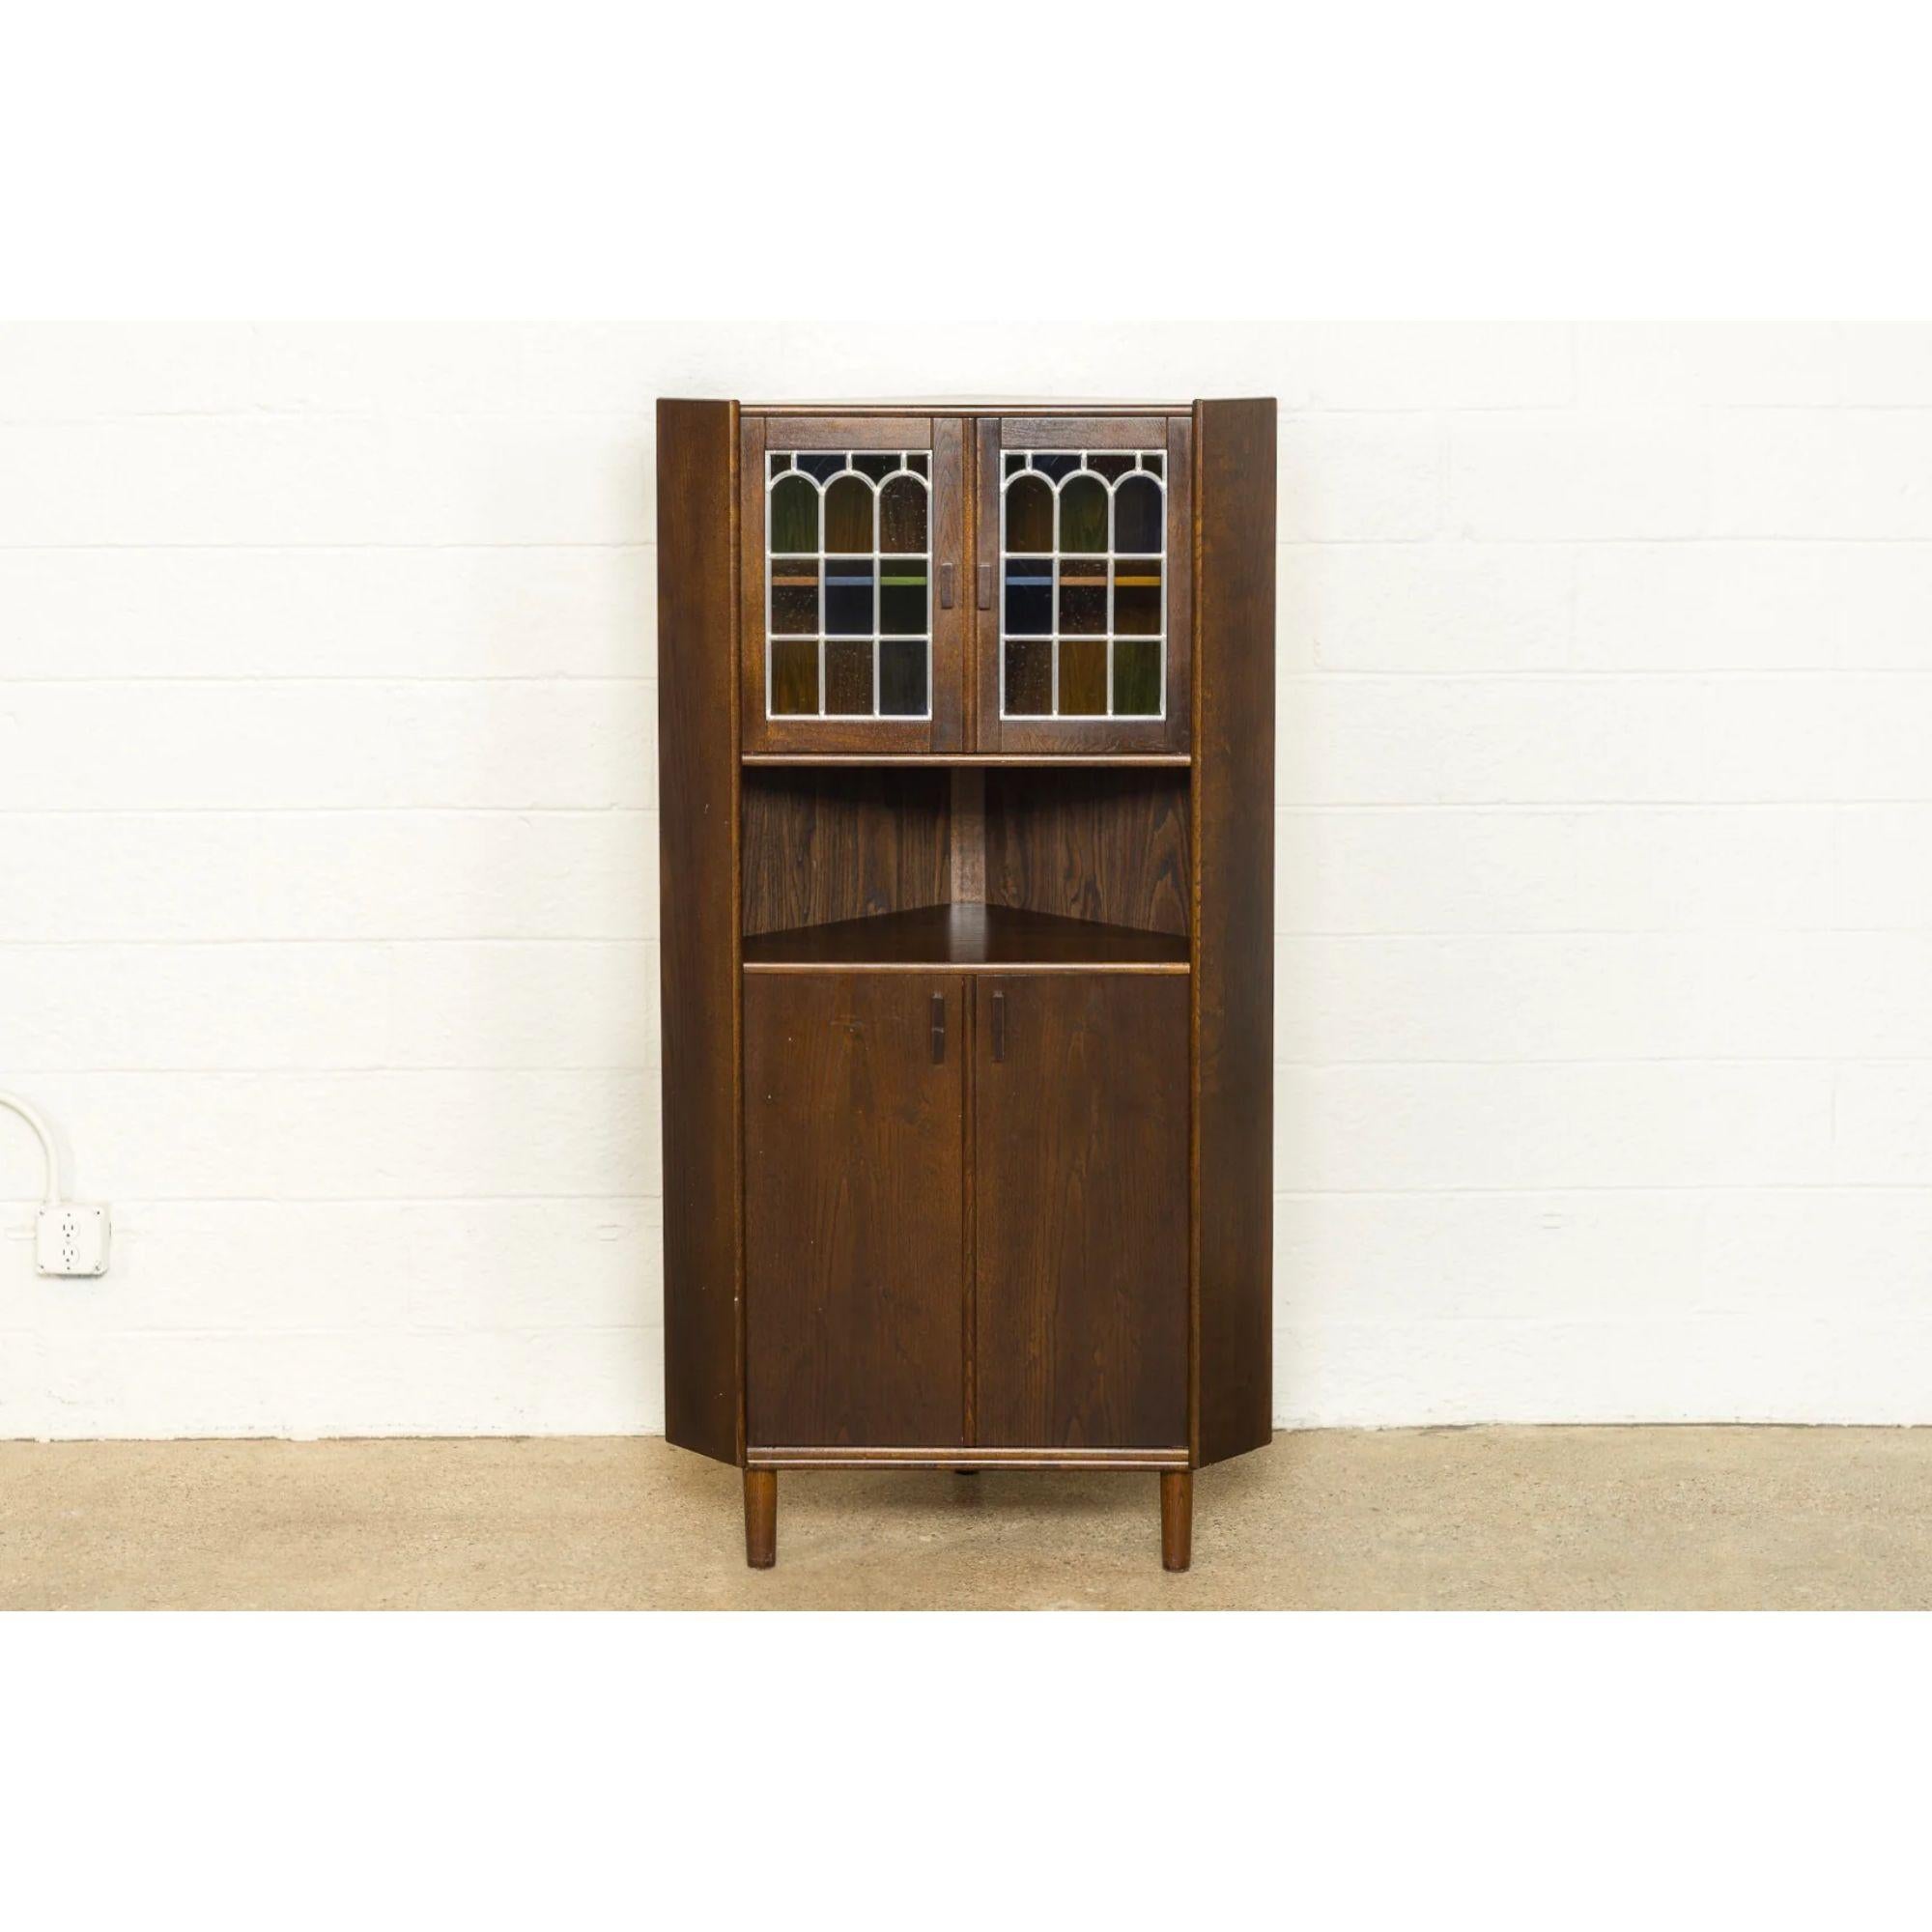 Vintage Mid Century Danish Modern Teak Stained Glass Corner China Cabinet

This vintage mid century Danish modern teak with stained glass corner cabinet is circa 1960. The classic Scandinavian modern design has clean minimalist lines. This unique